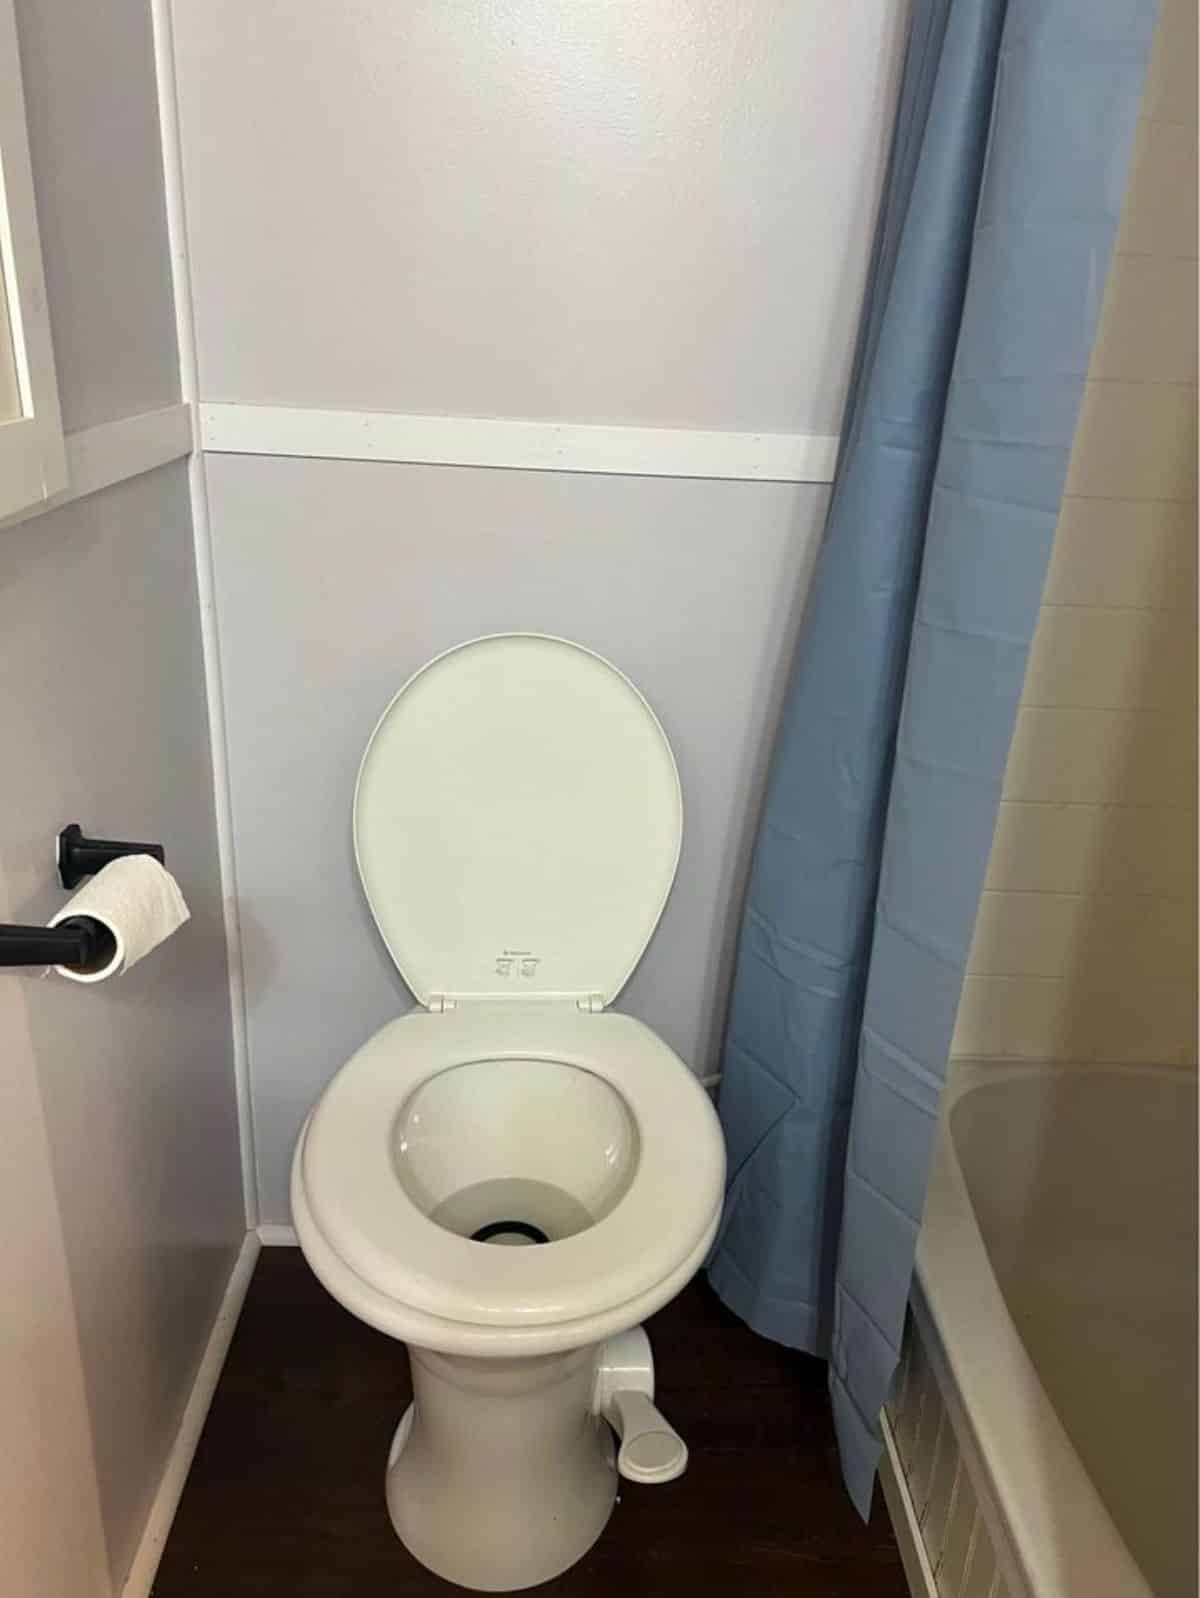 standard toilet in bathroom of the house